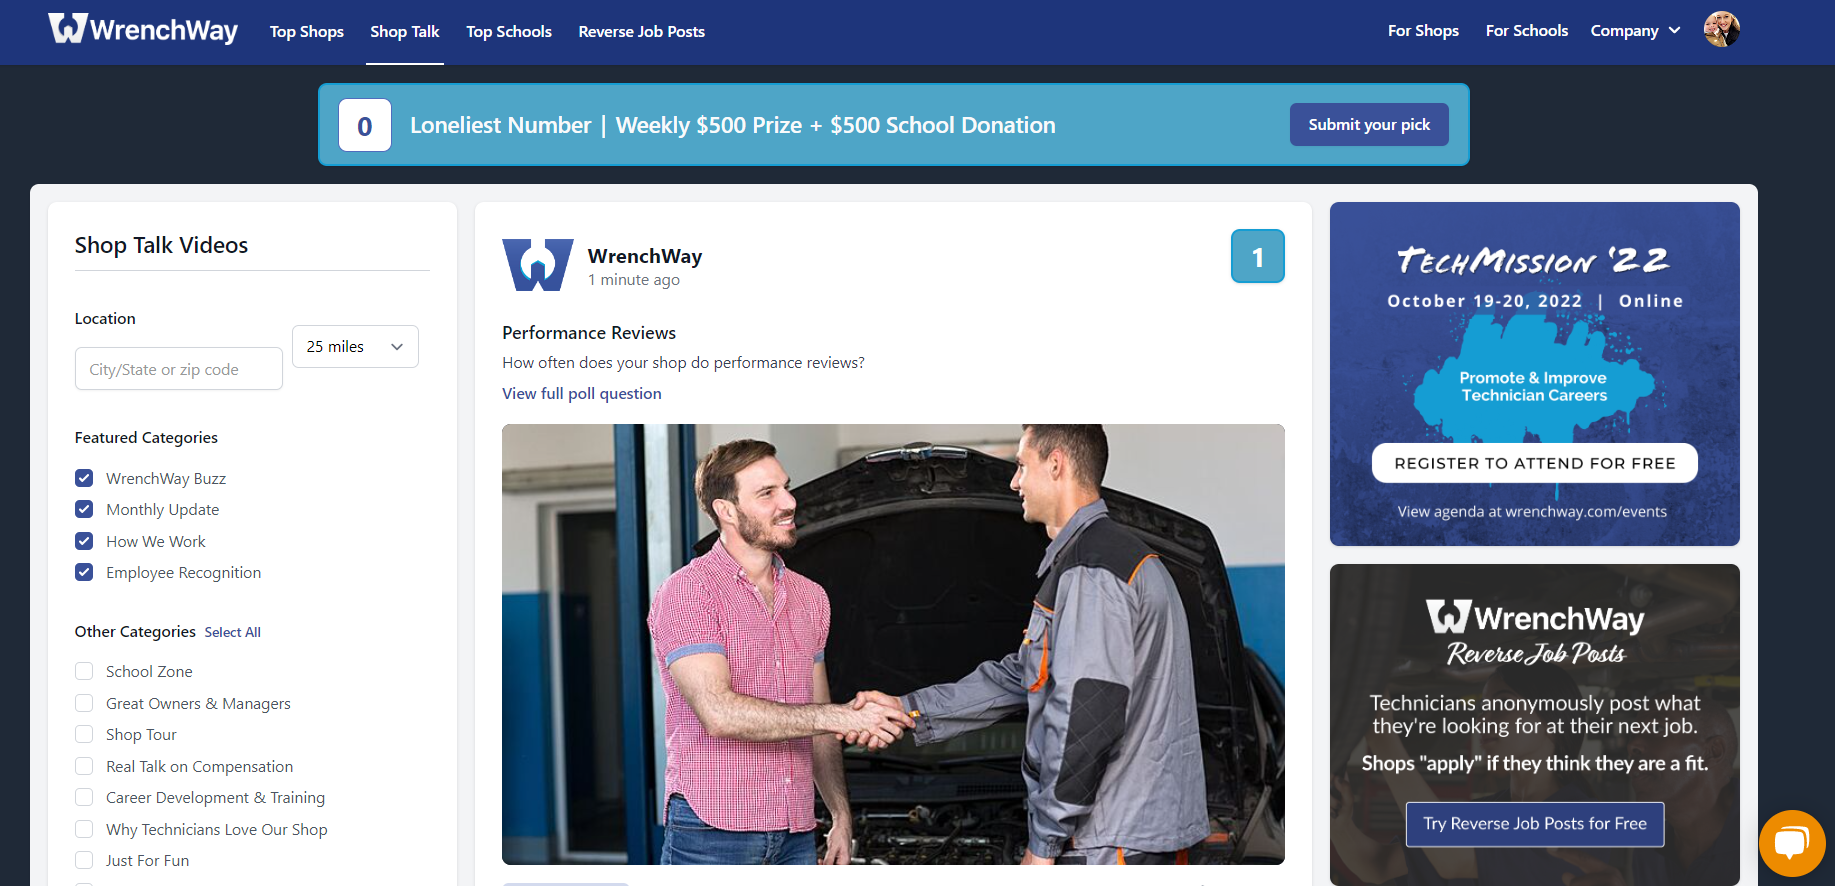 WrenchWay Shop Talk page with Loneliest Number banner